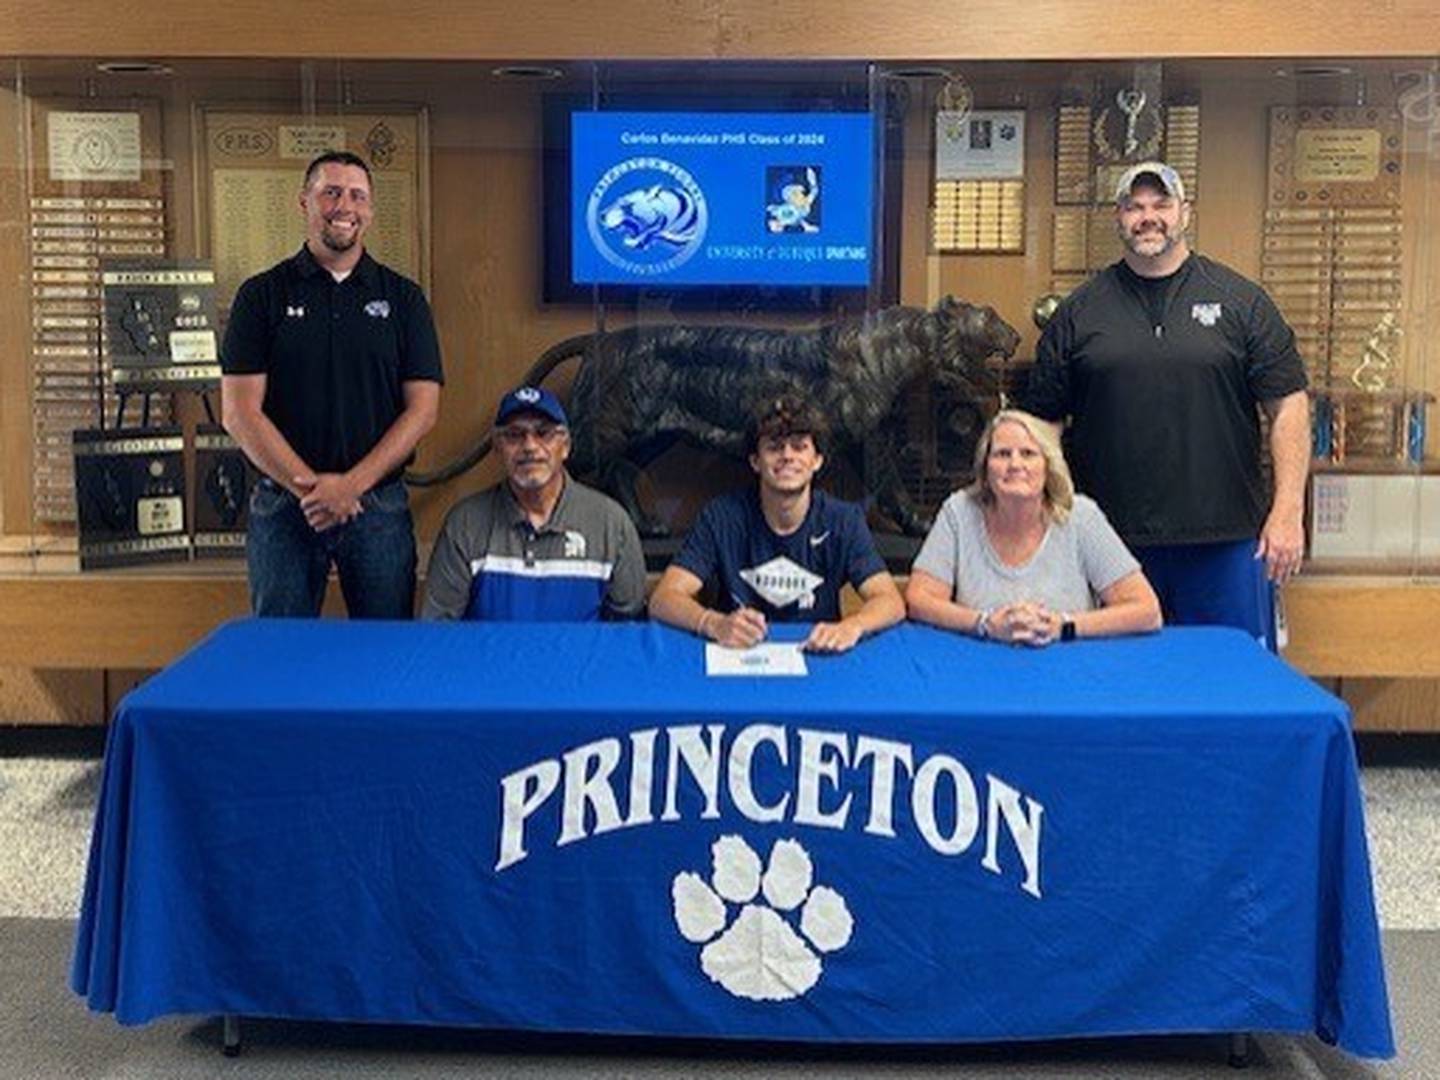 Recent Princeton graduate Carlos Benavidez recently signed to play soccer for the University of Dubuque. He was joined at his signing by his parents (front)  Rod and Sondra Benavidez; and (back row) PHS coaches Nick Lowe and Ryan Pearson.